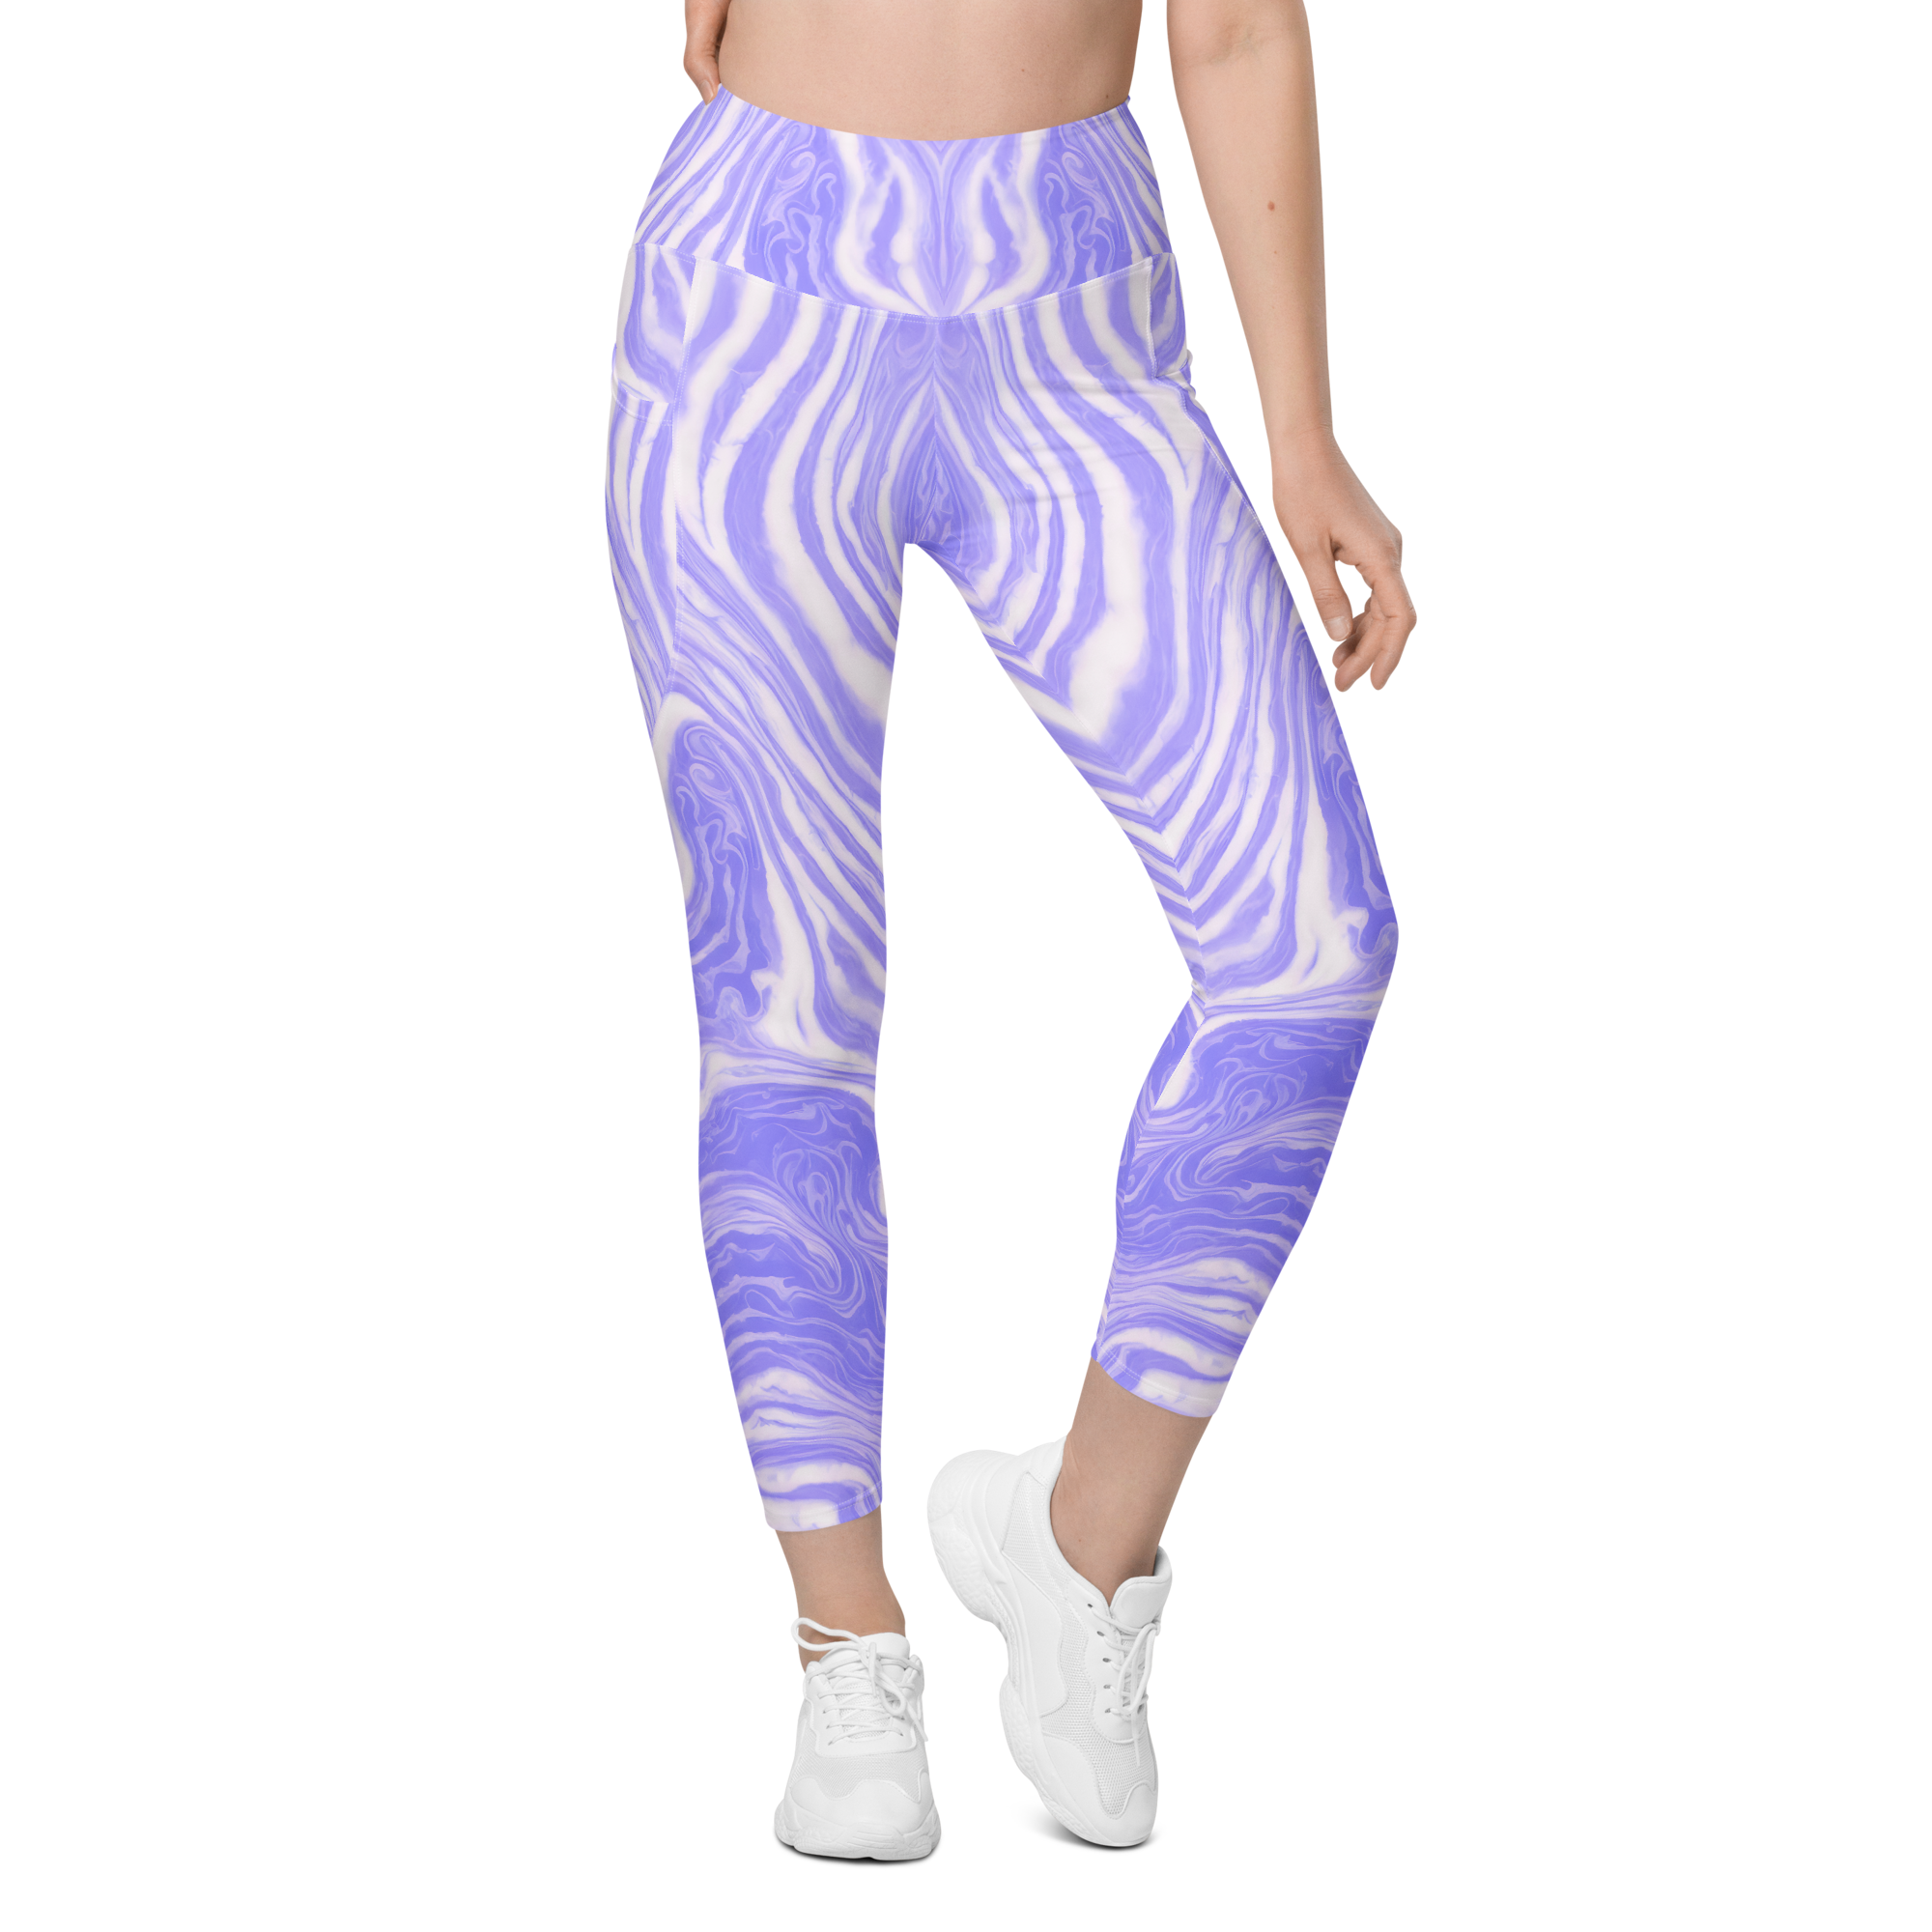 Just Dropped! Chakra 3 Leggings with pockets